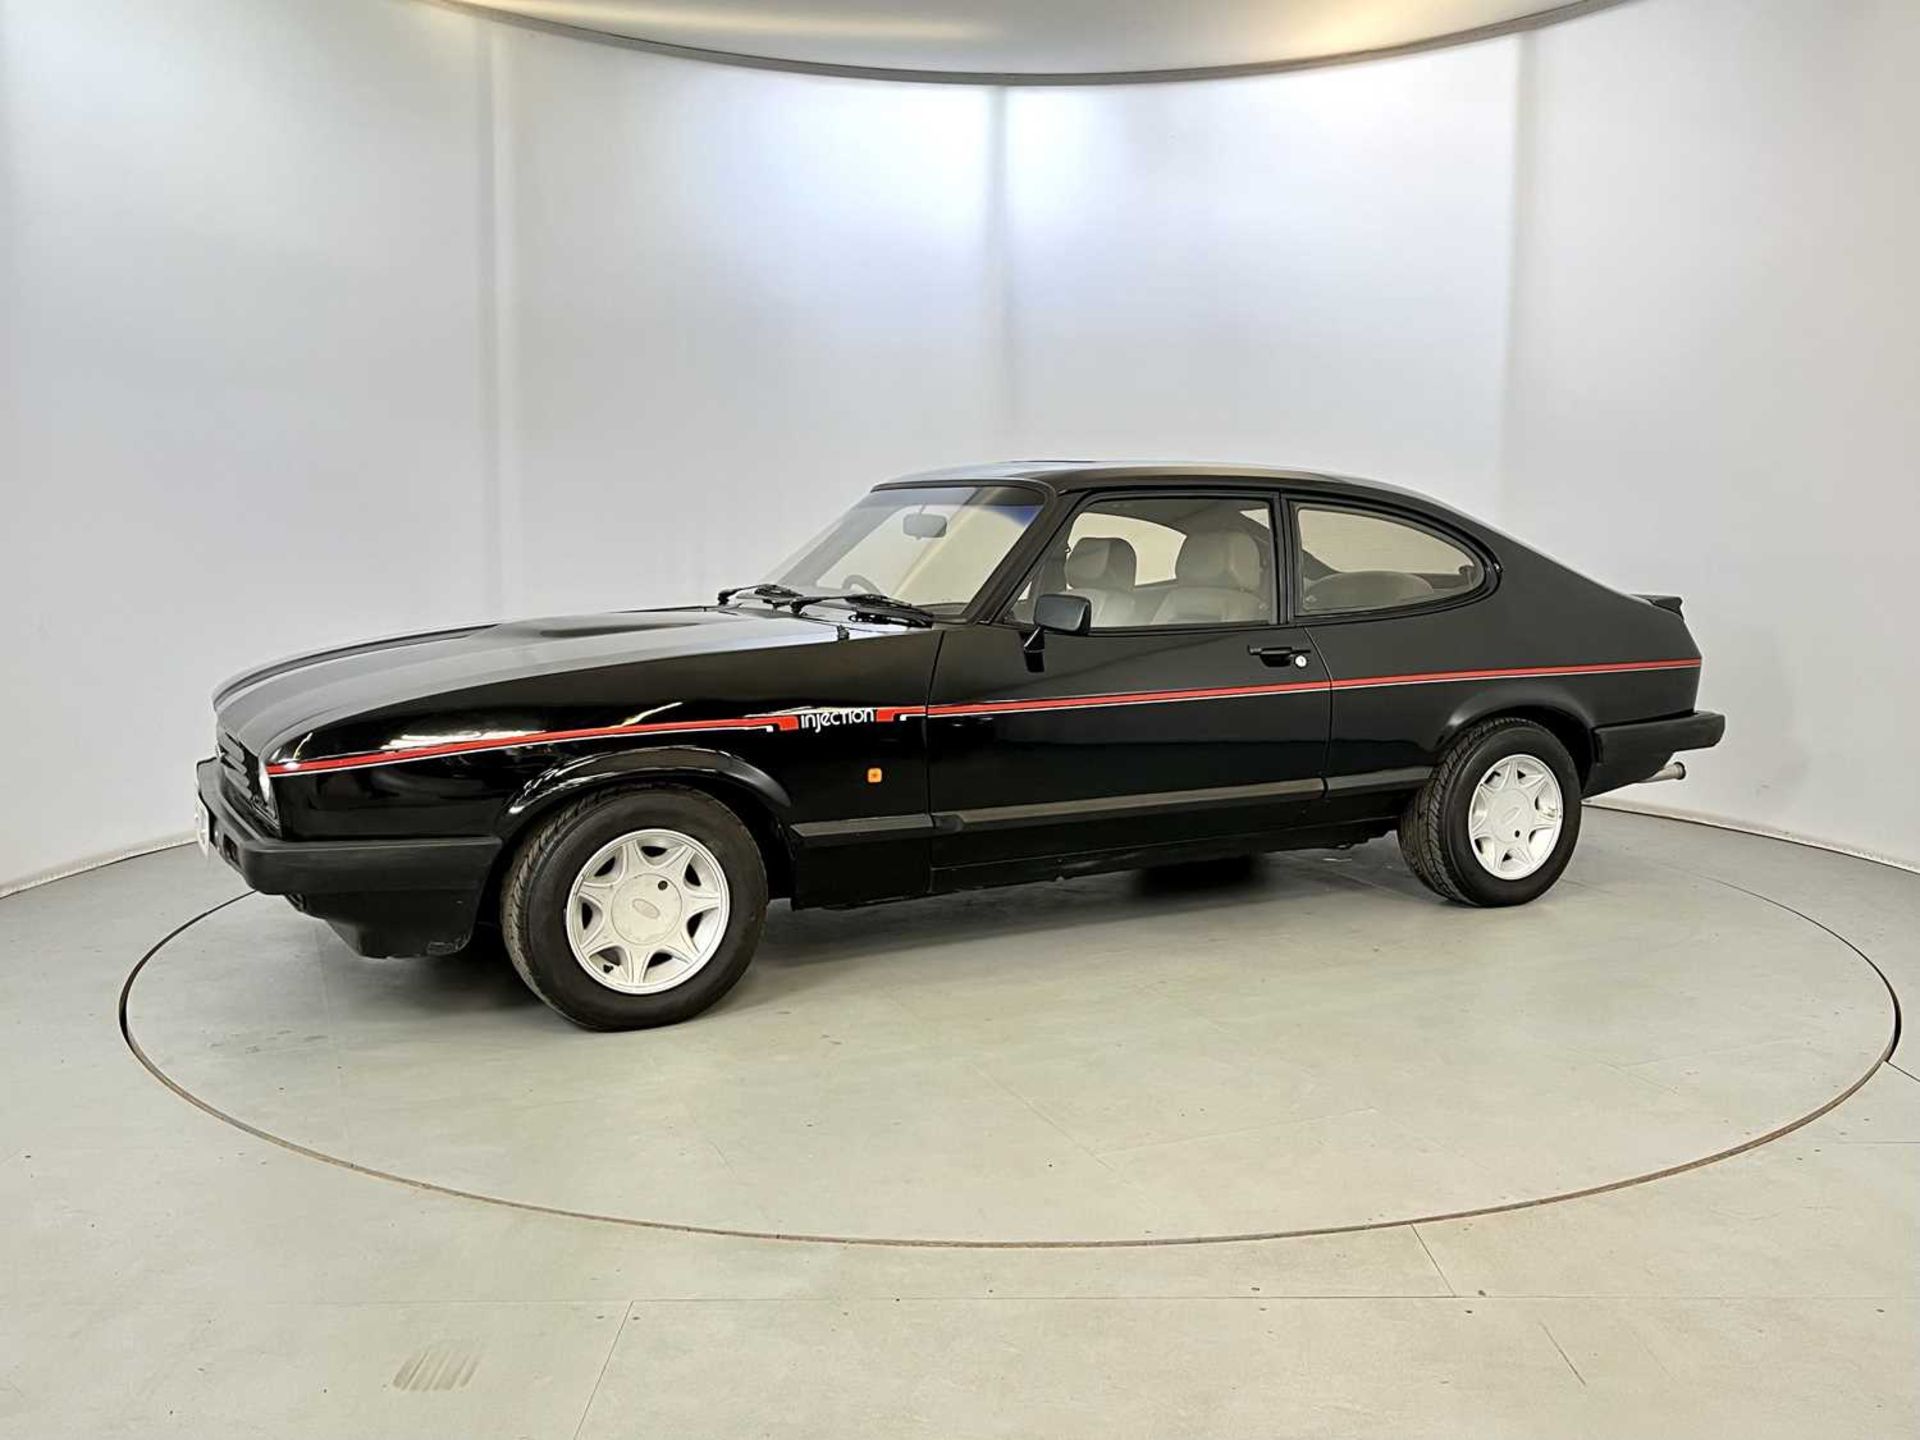 1987 Ford Capri 2.8 Injection - Image 4 of 28